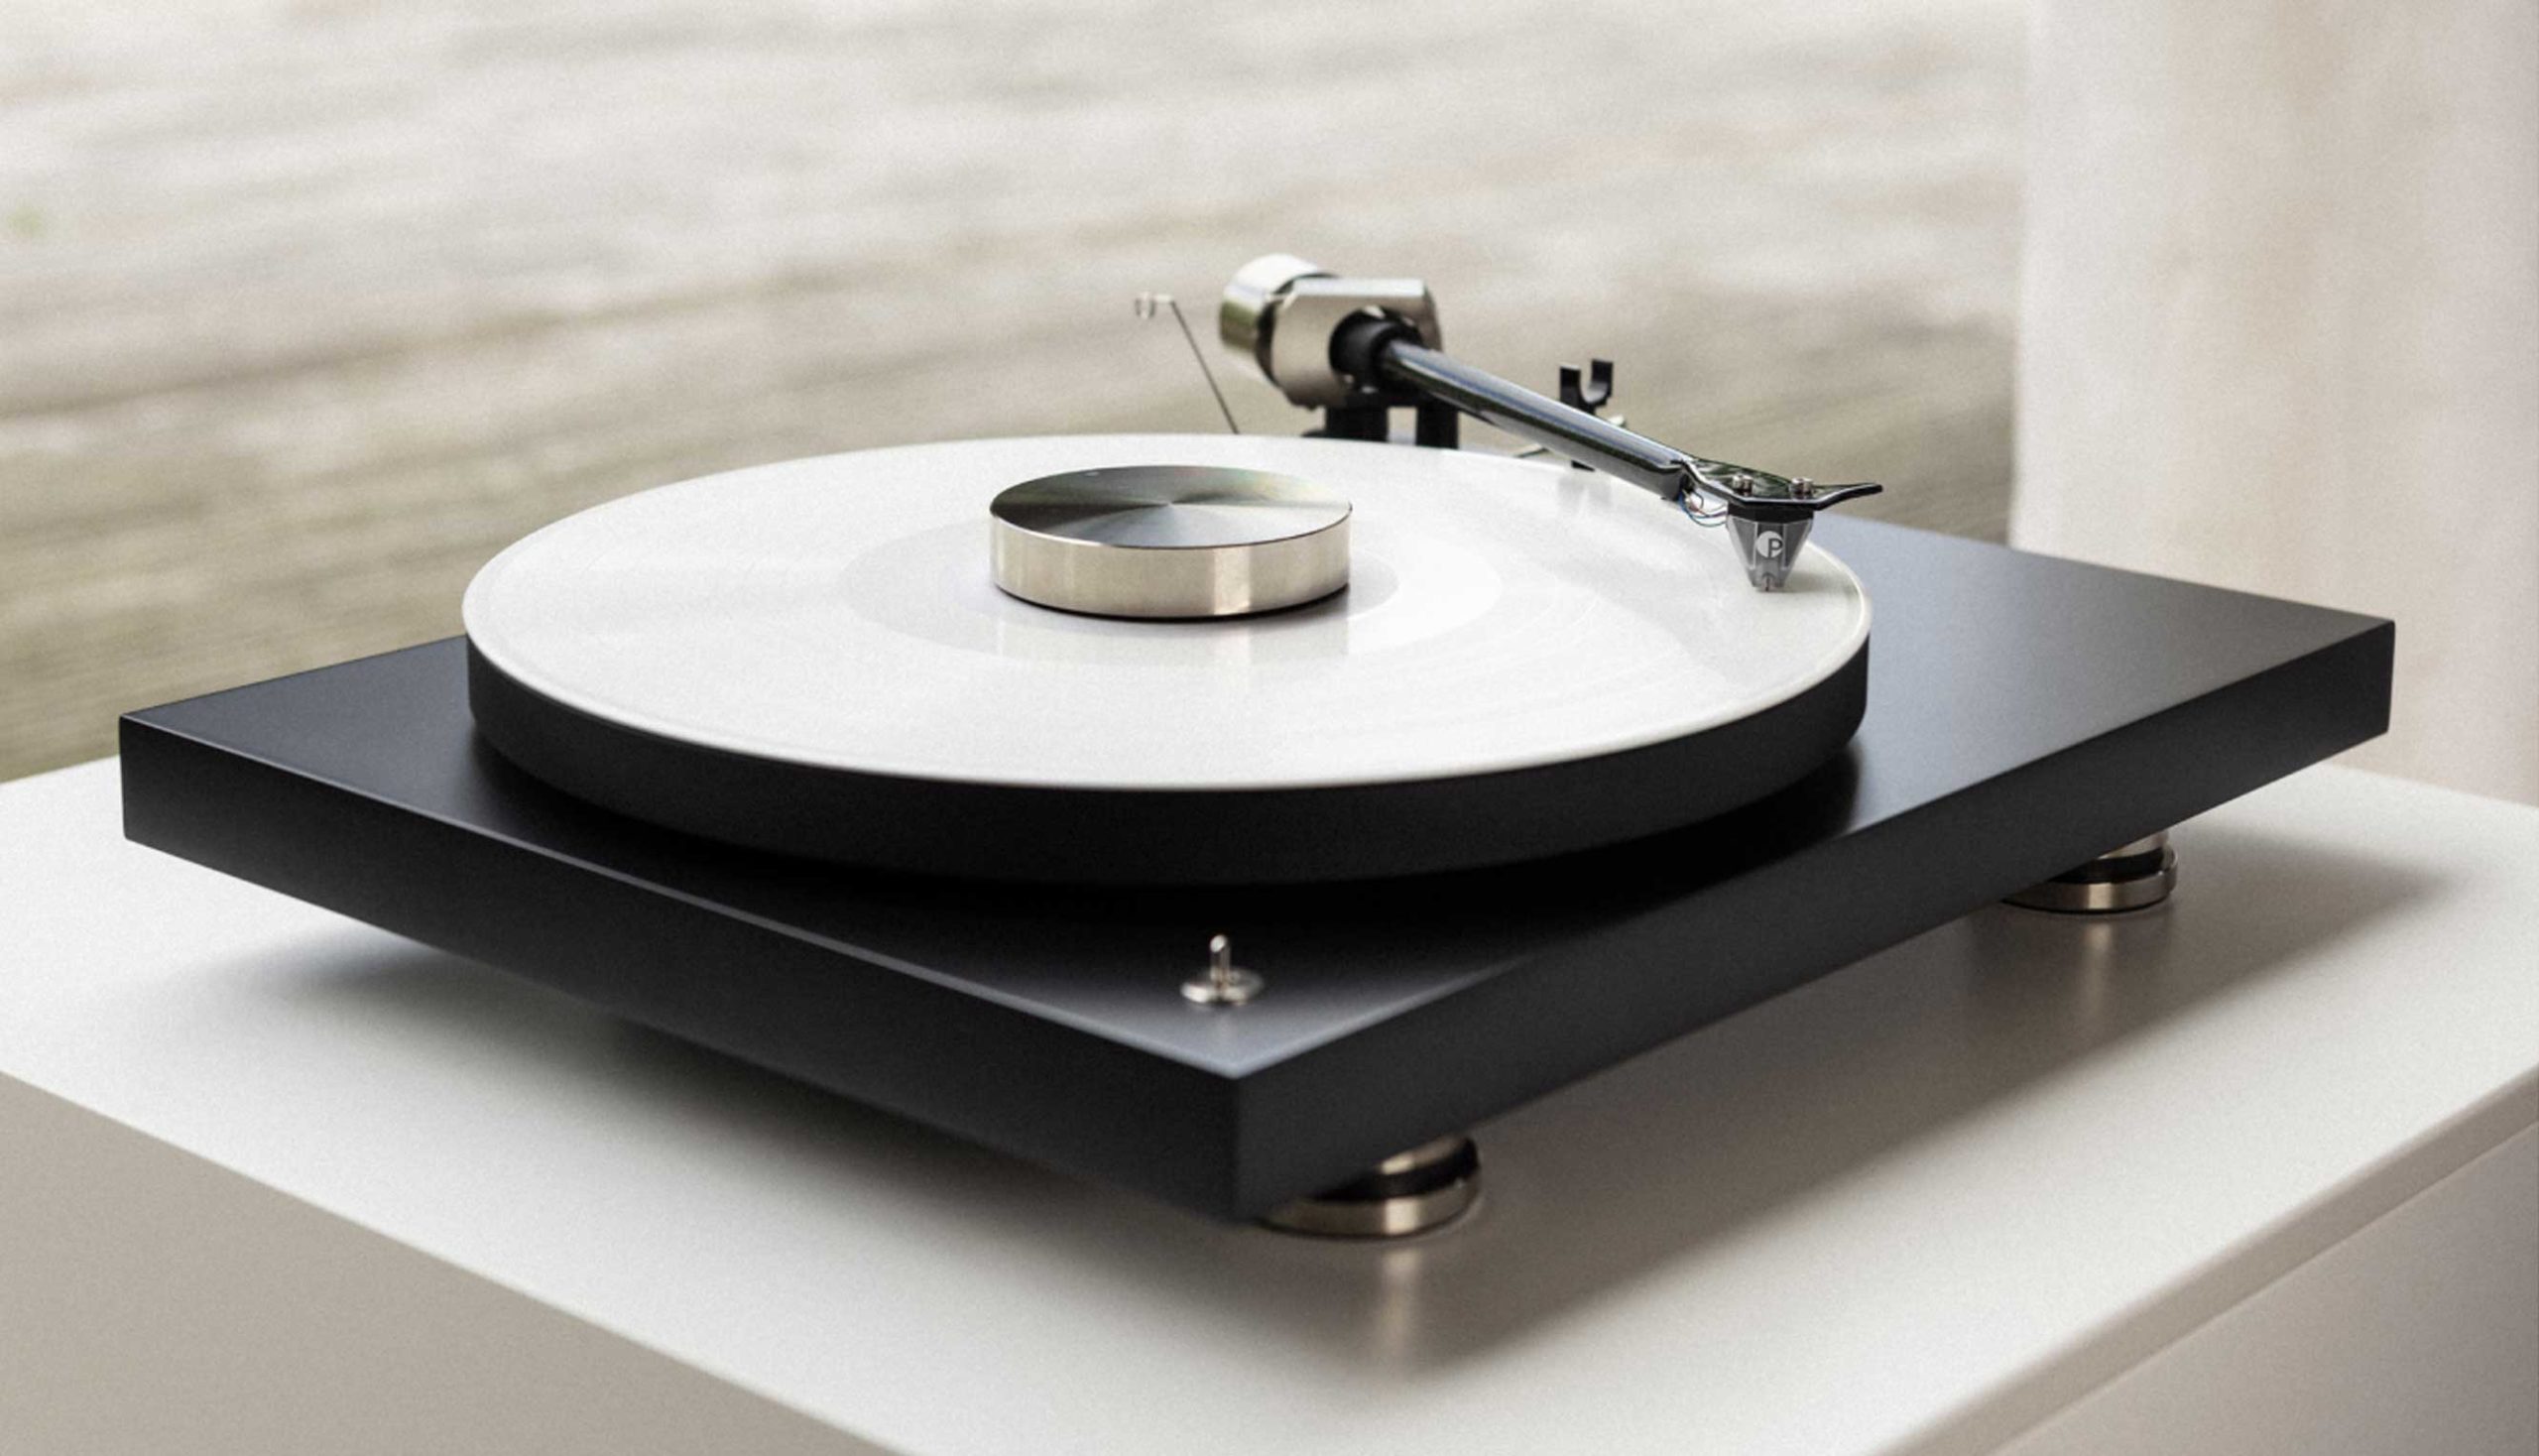 Pro-Ject Audio Systems Turntables at Overture